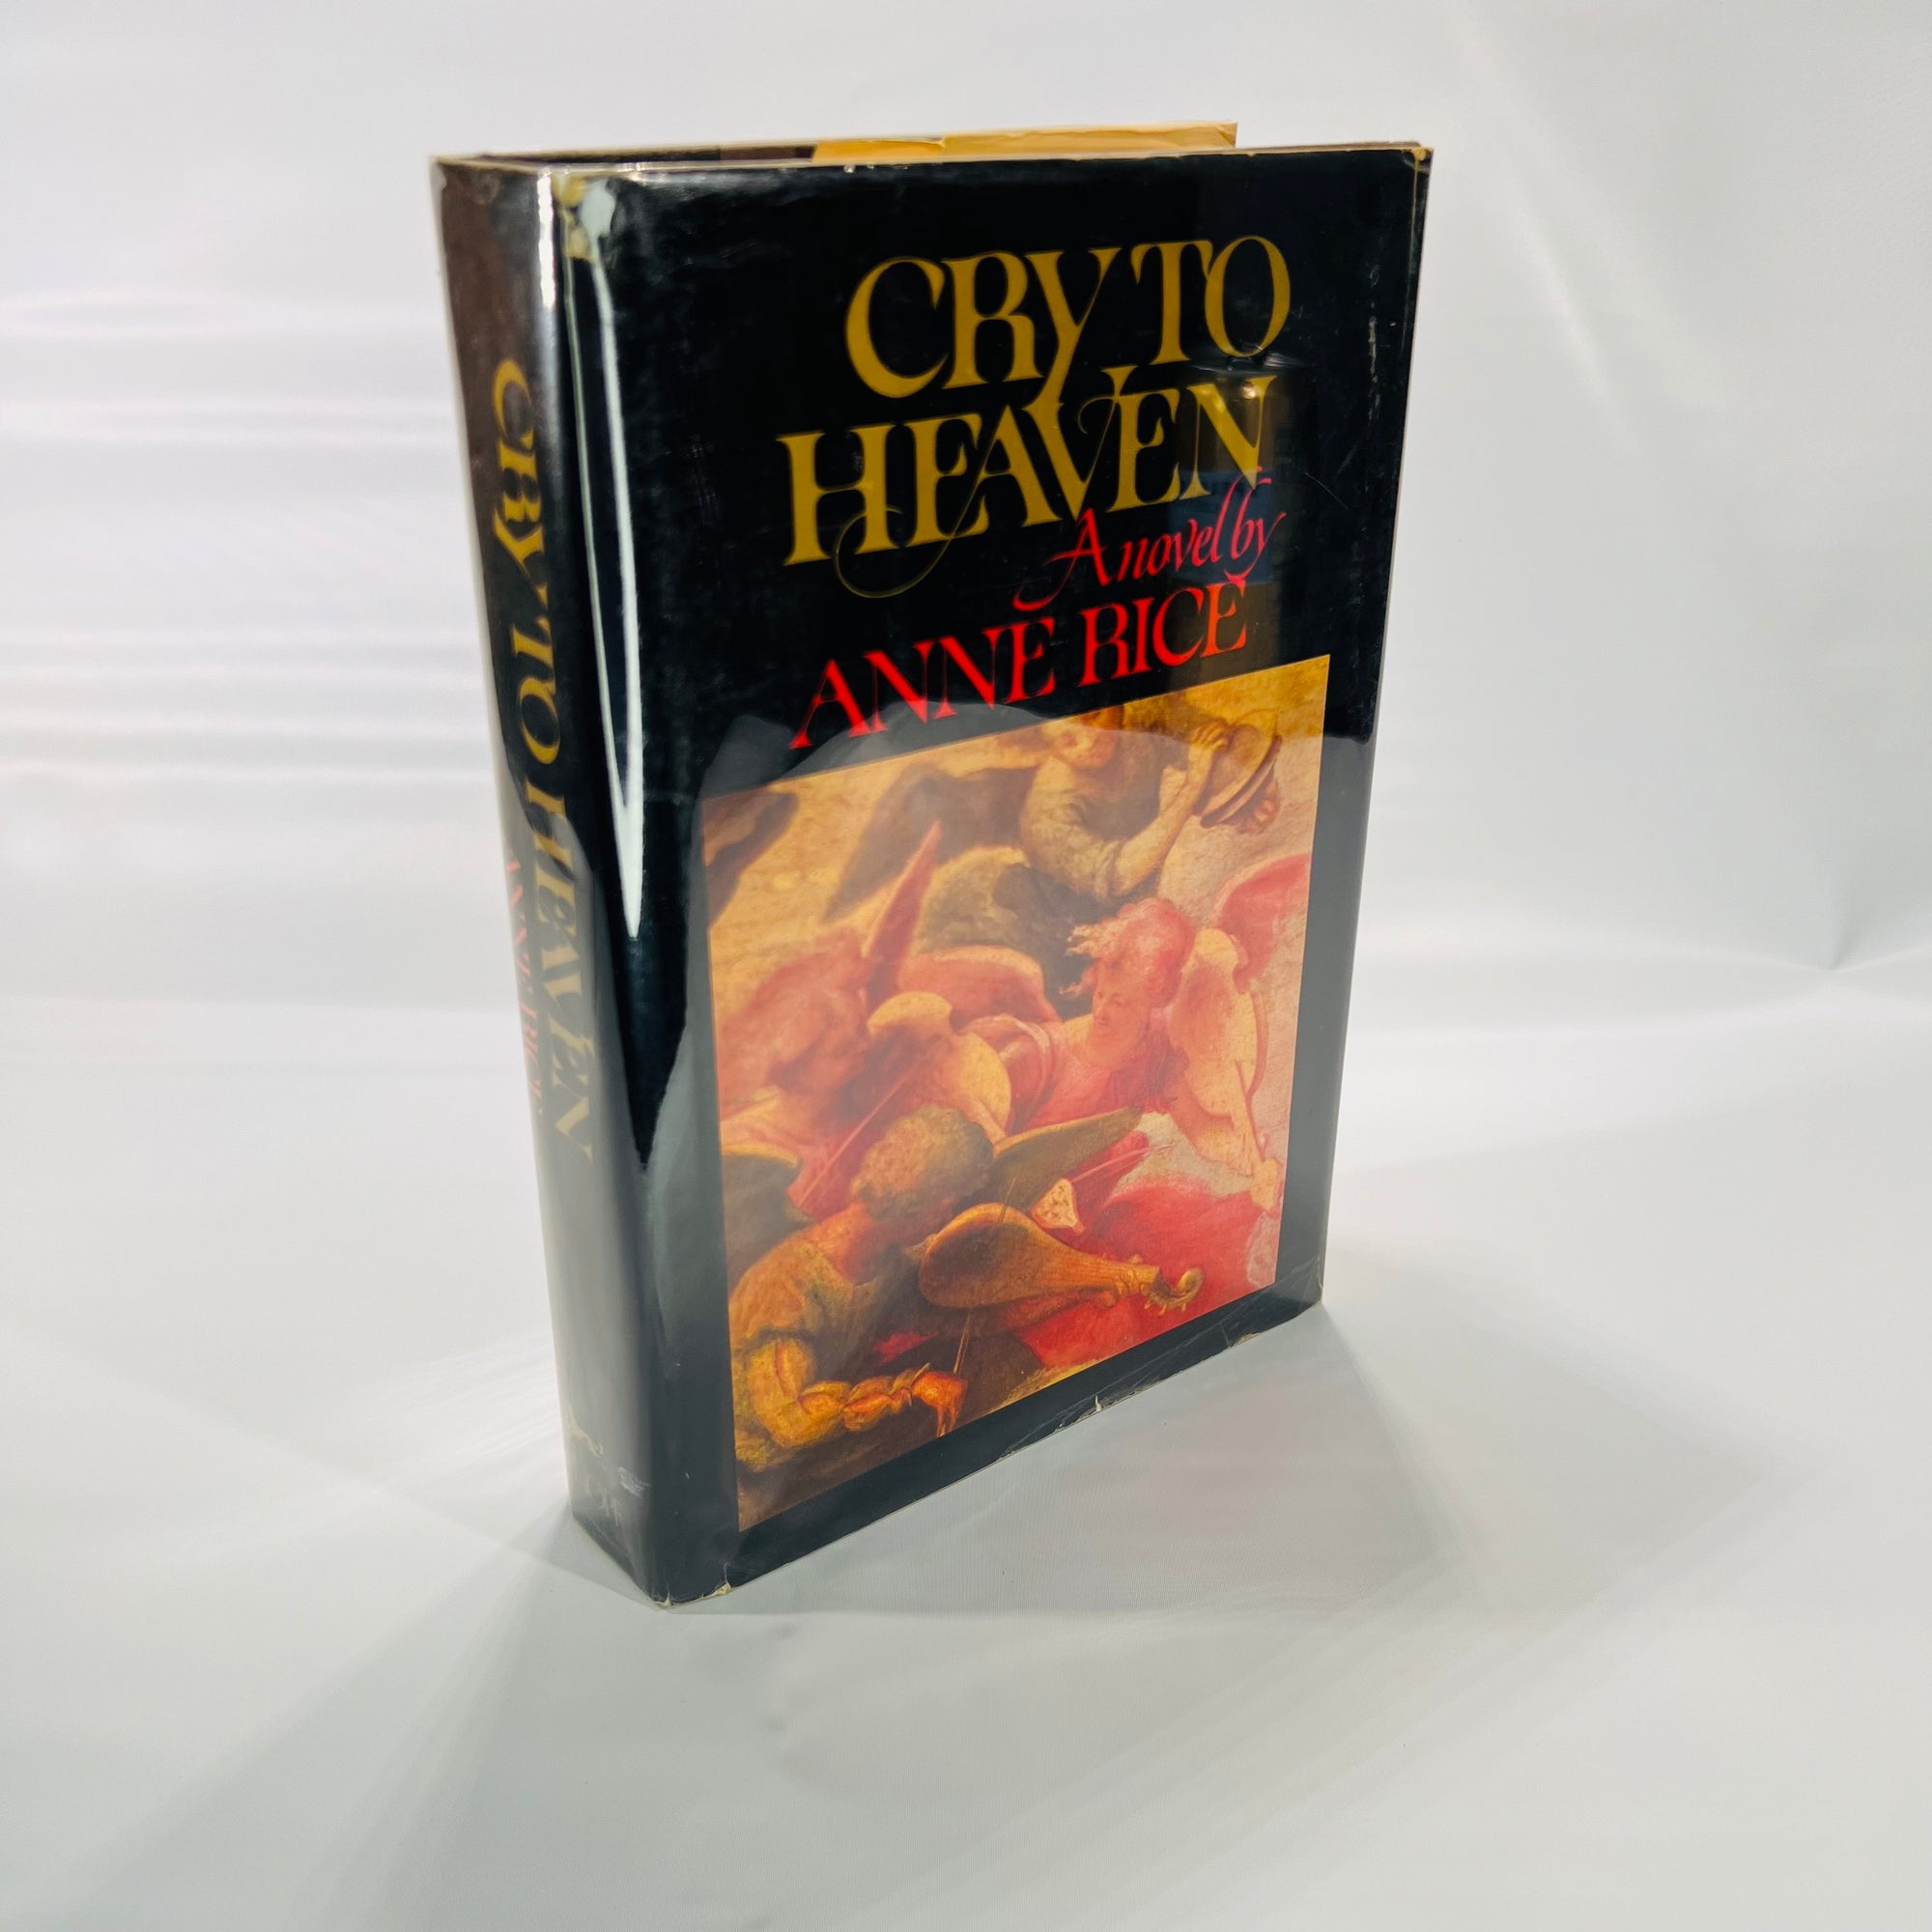 Cry to Heaven a novel by Anne Rice 1982 First Edition Alfred A. Knopf